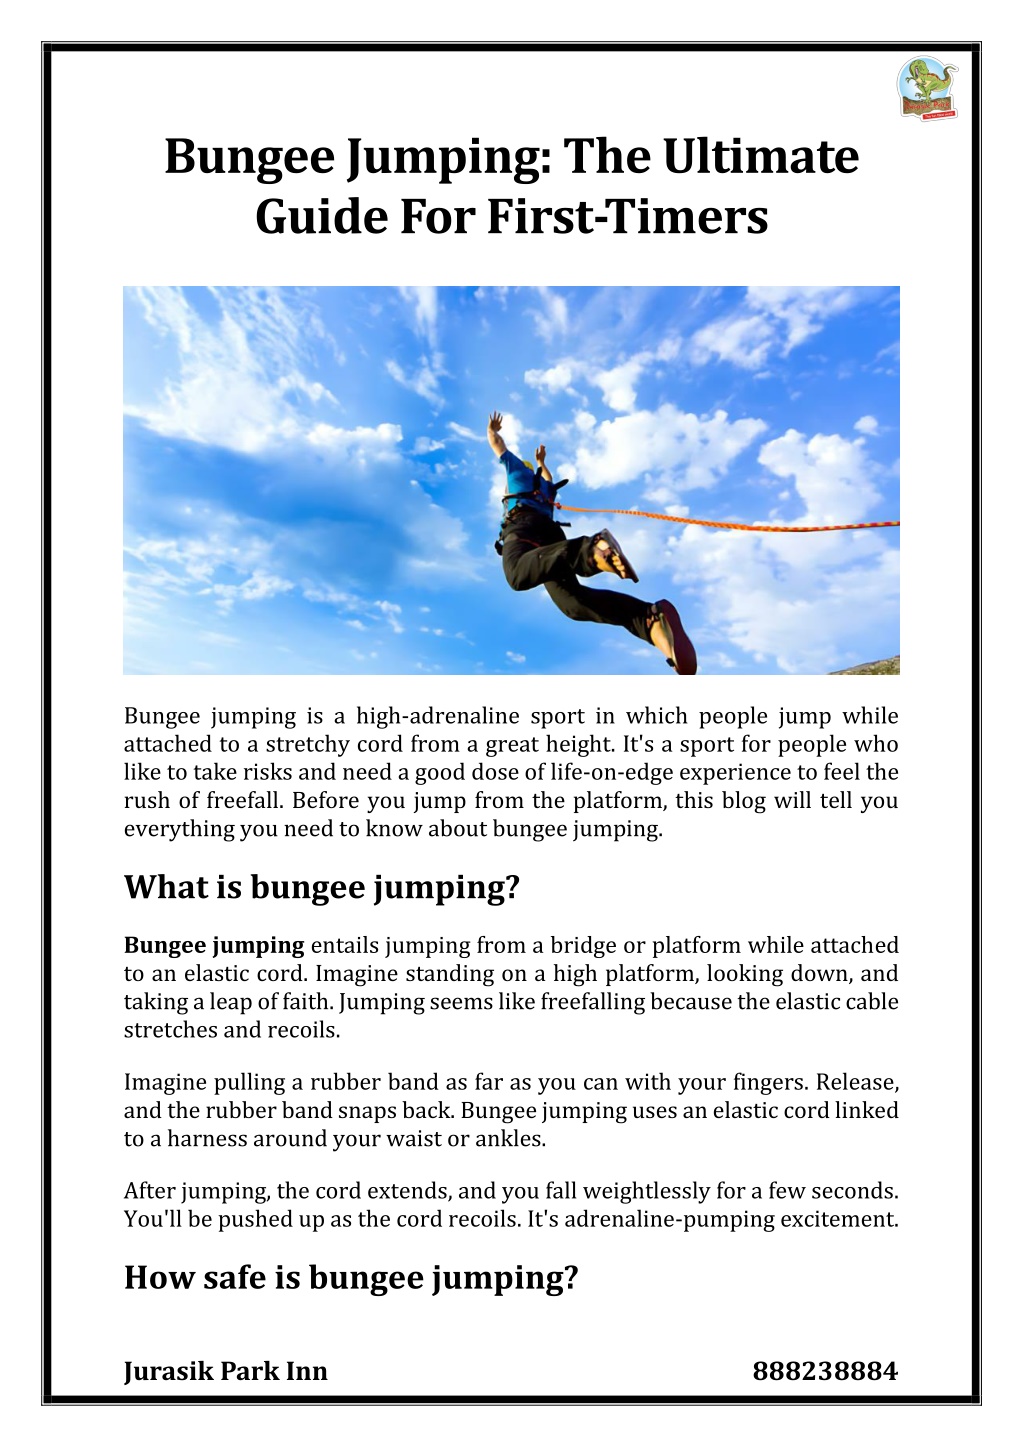 The Complete Guide to Bungee Jumping